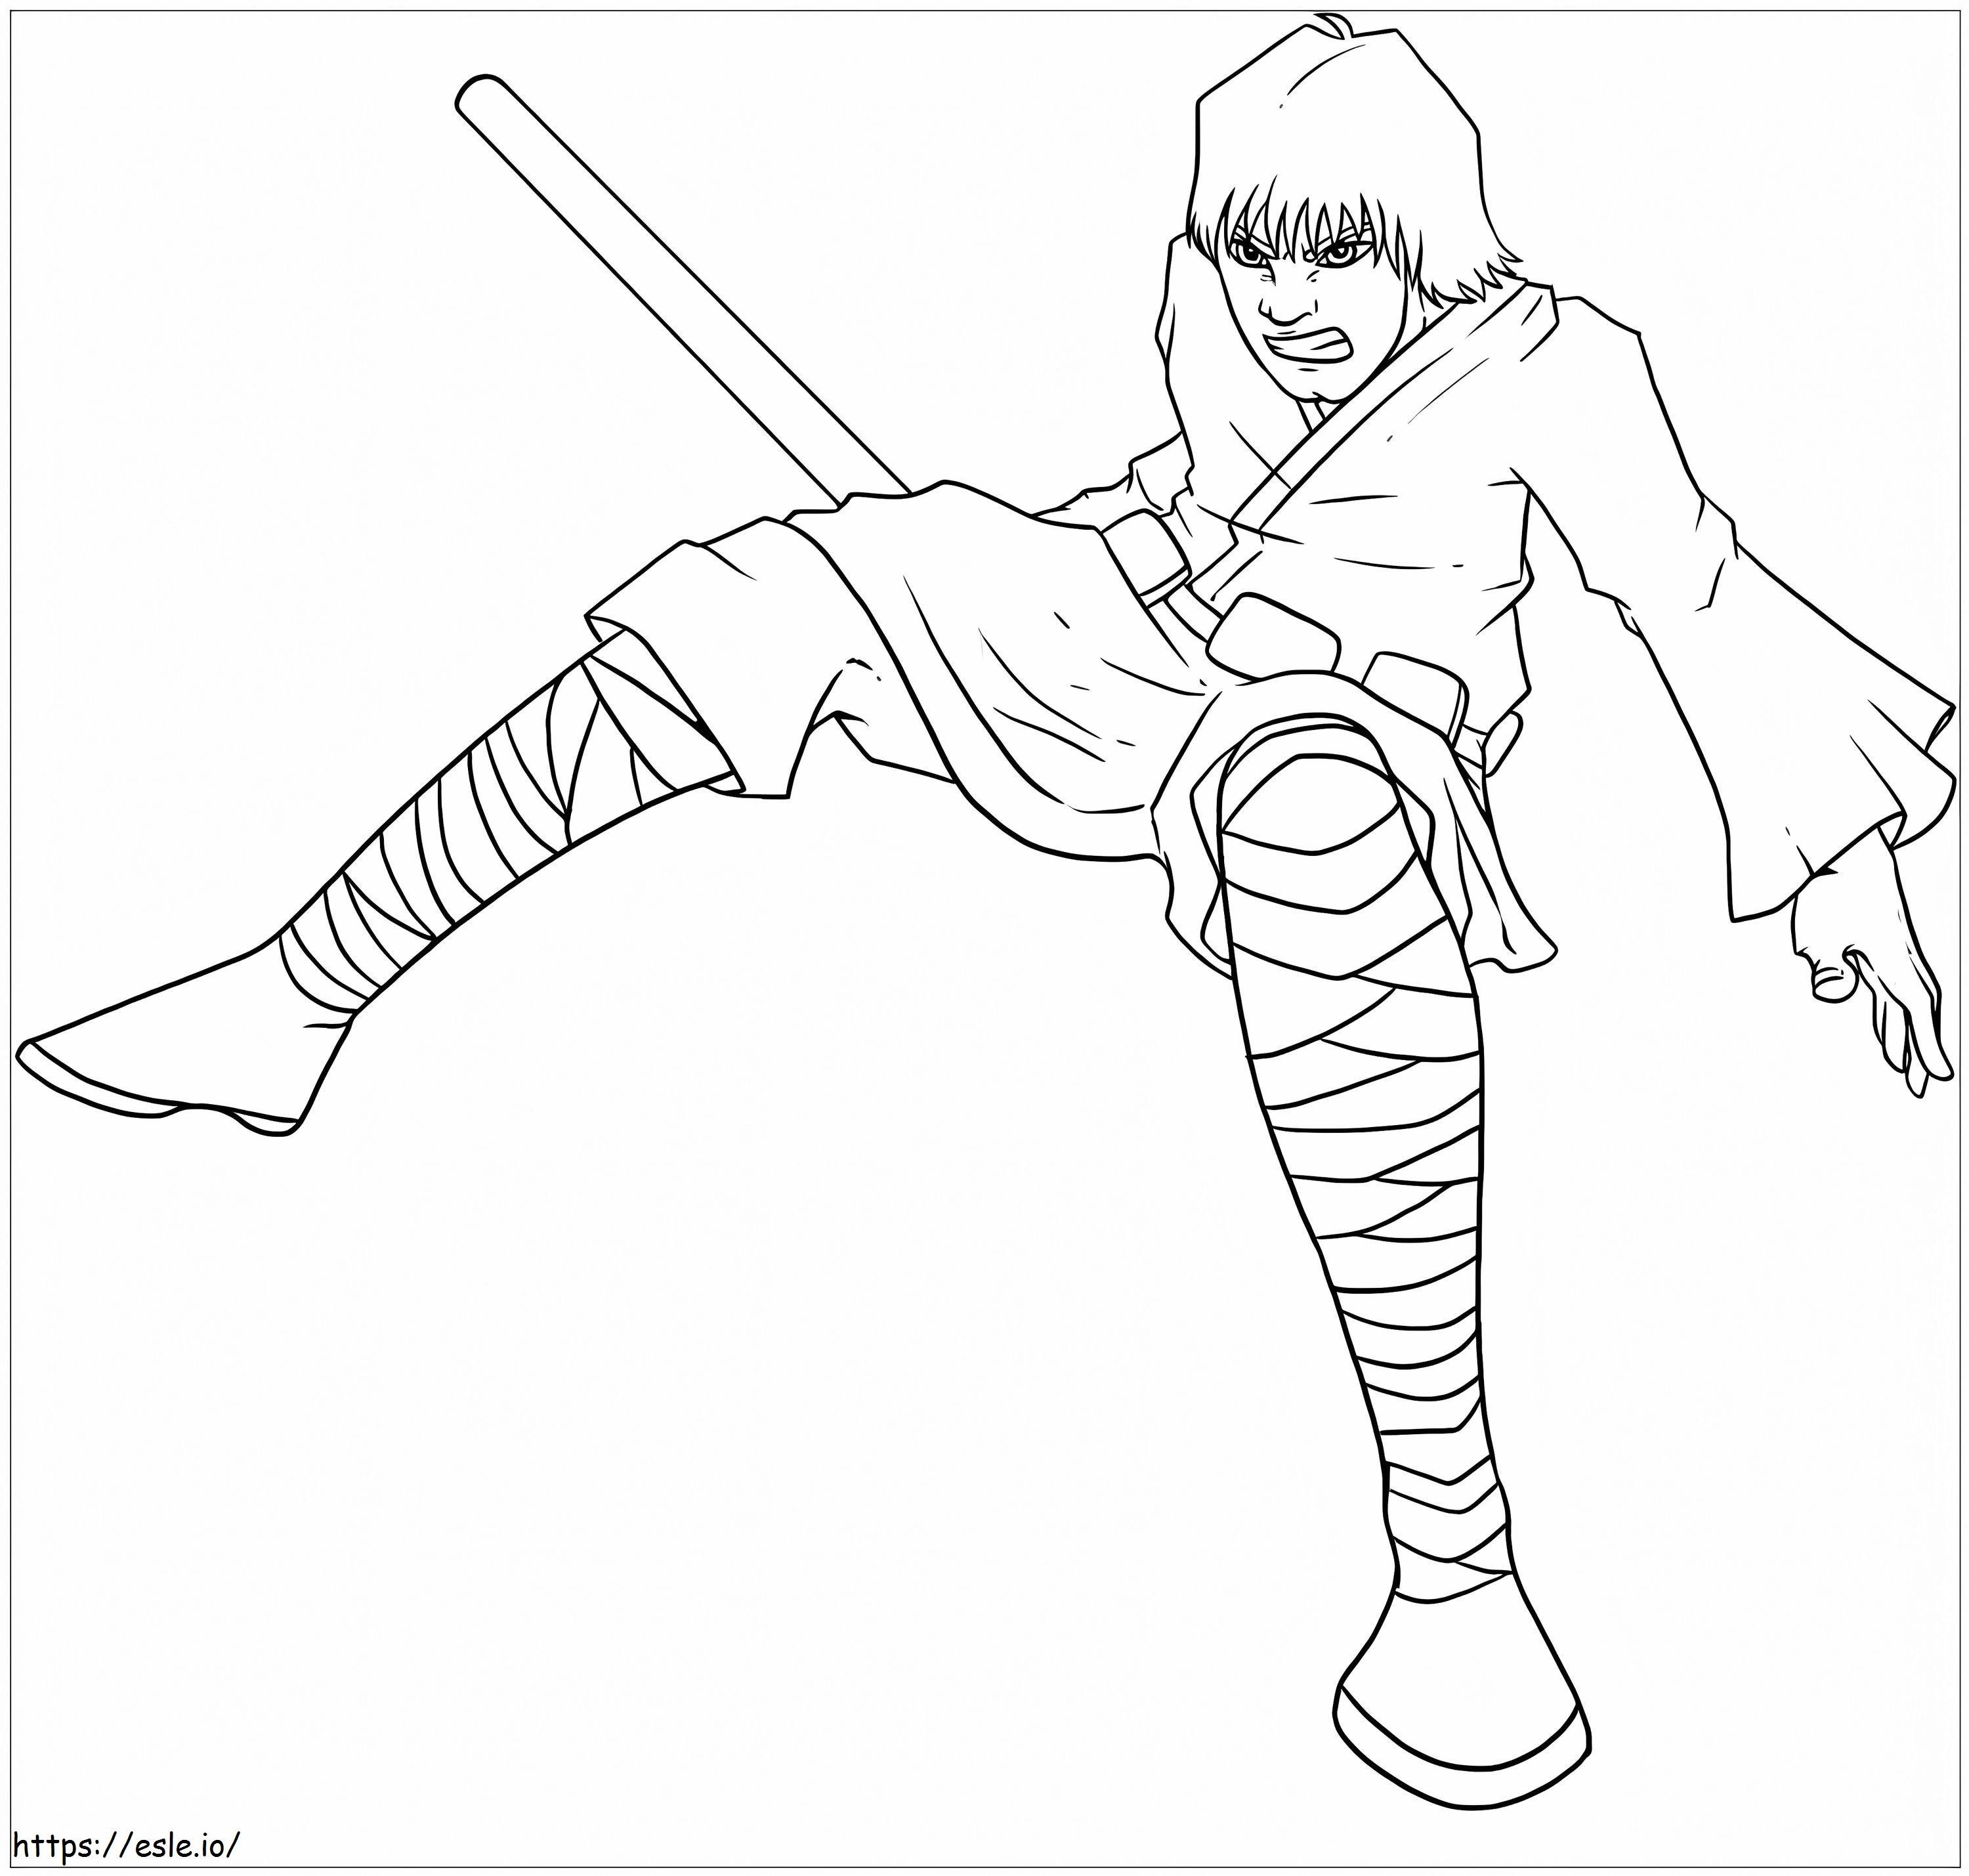 Angry Luke Skywalker coloring page